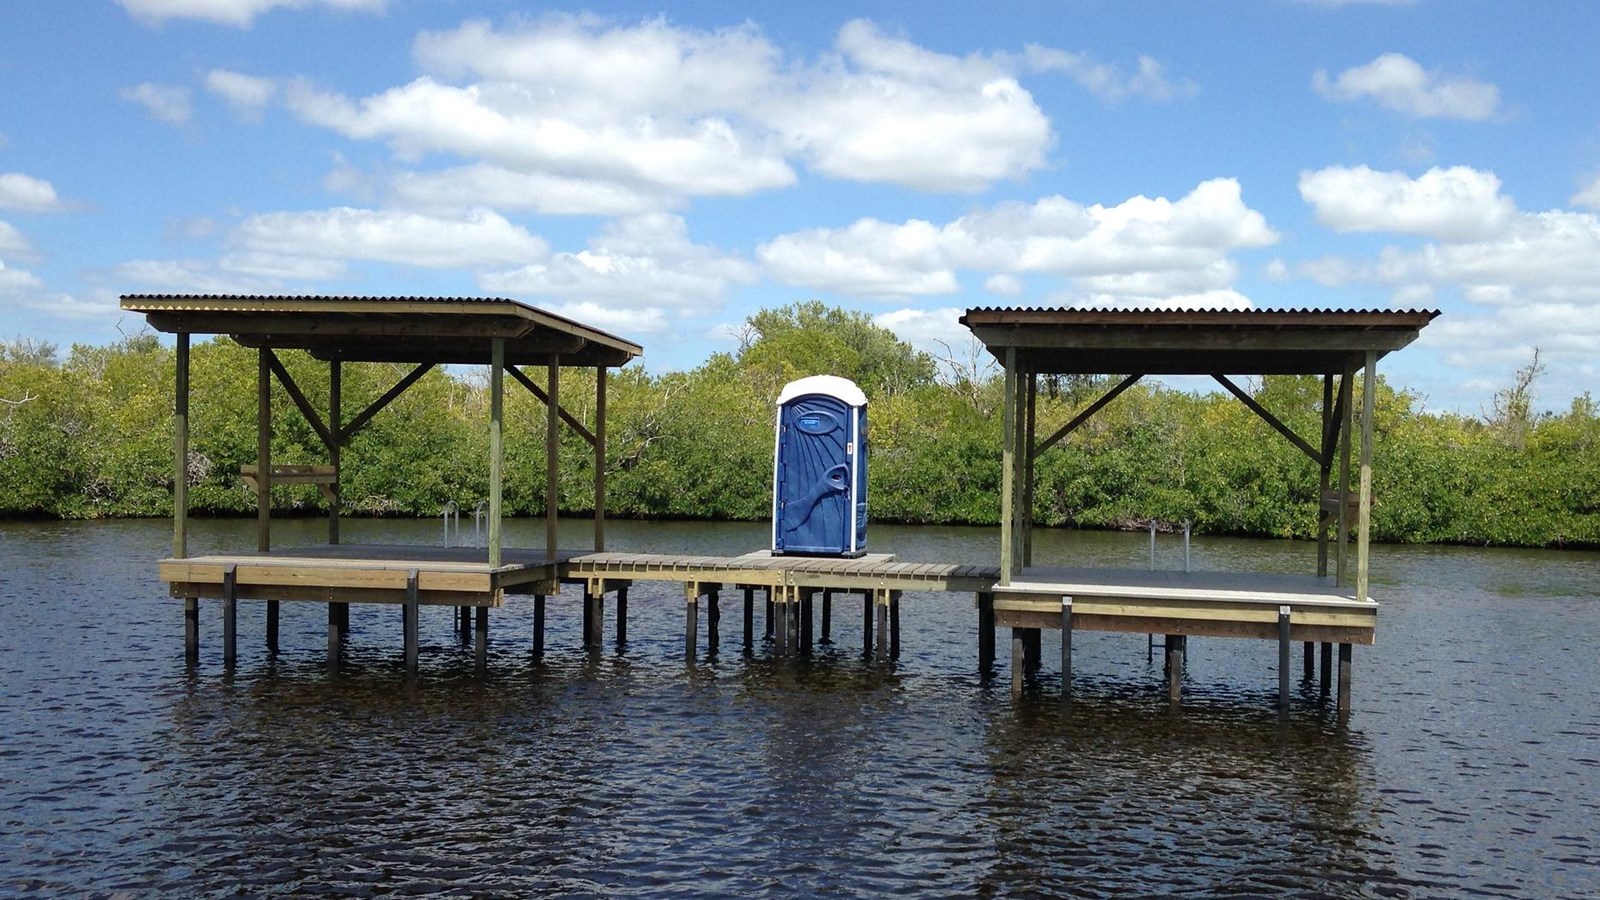 A open air platform elevated over the water with two roofs and a blue portable toilet in between